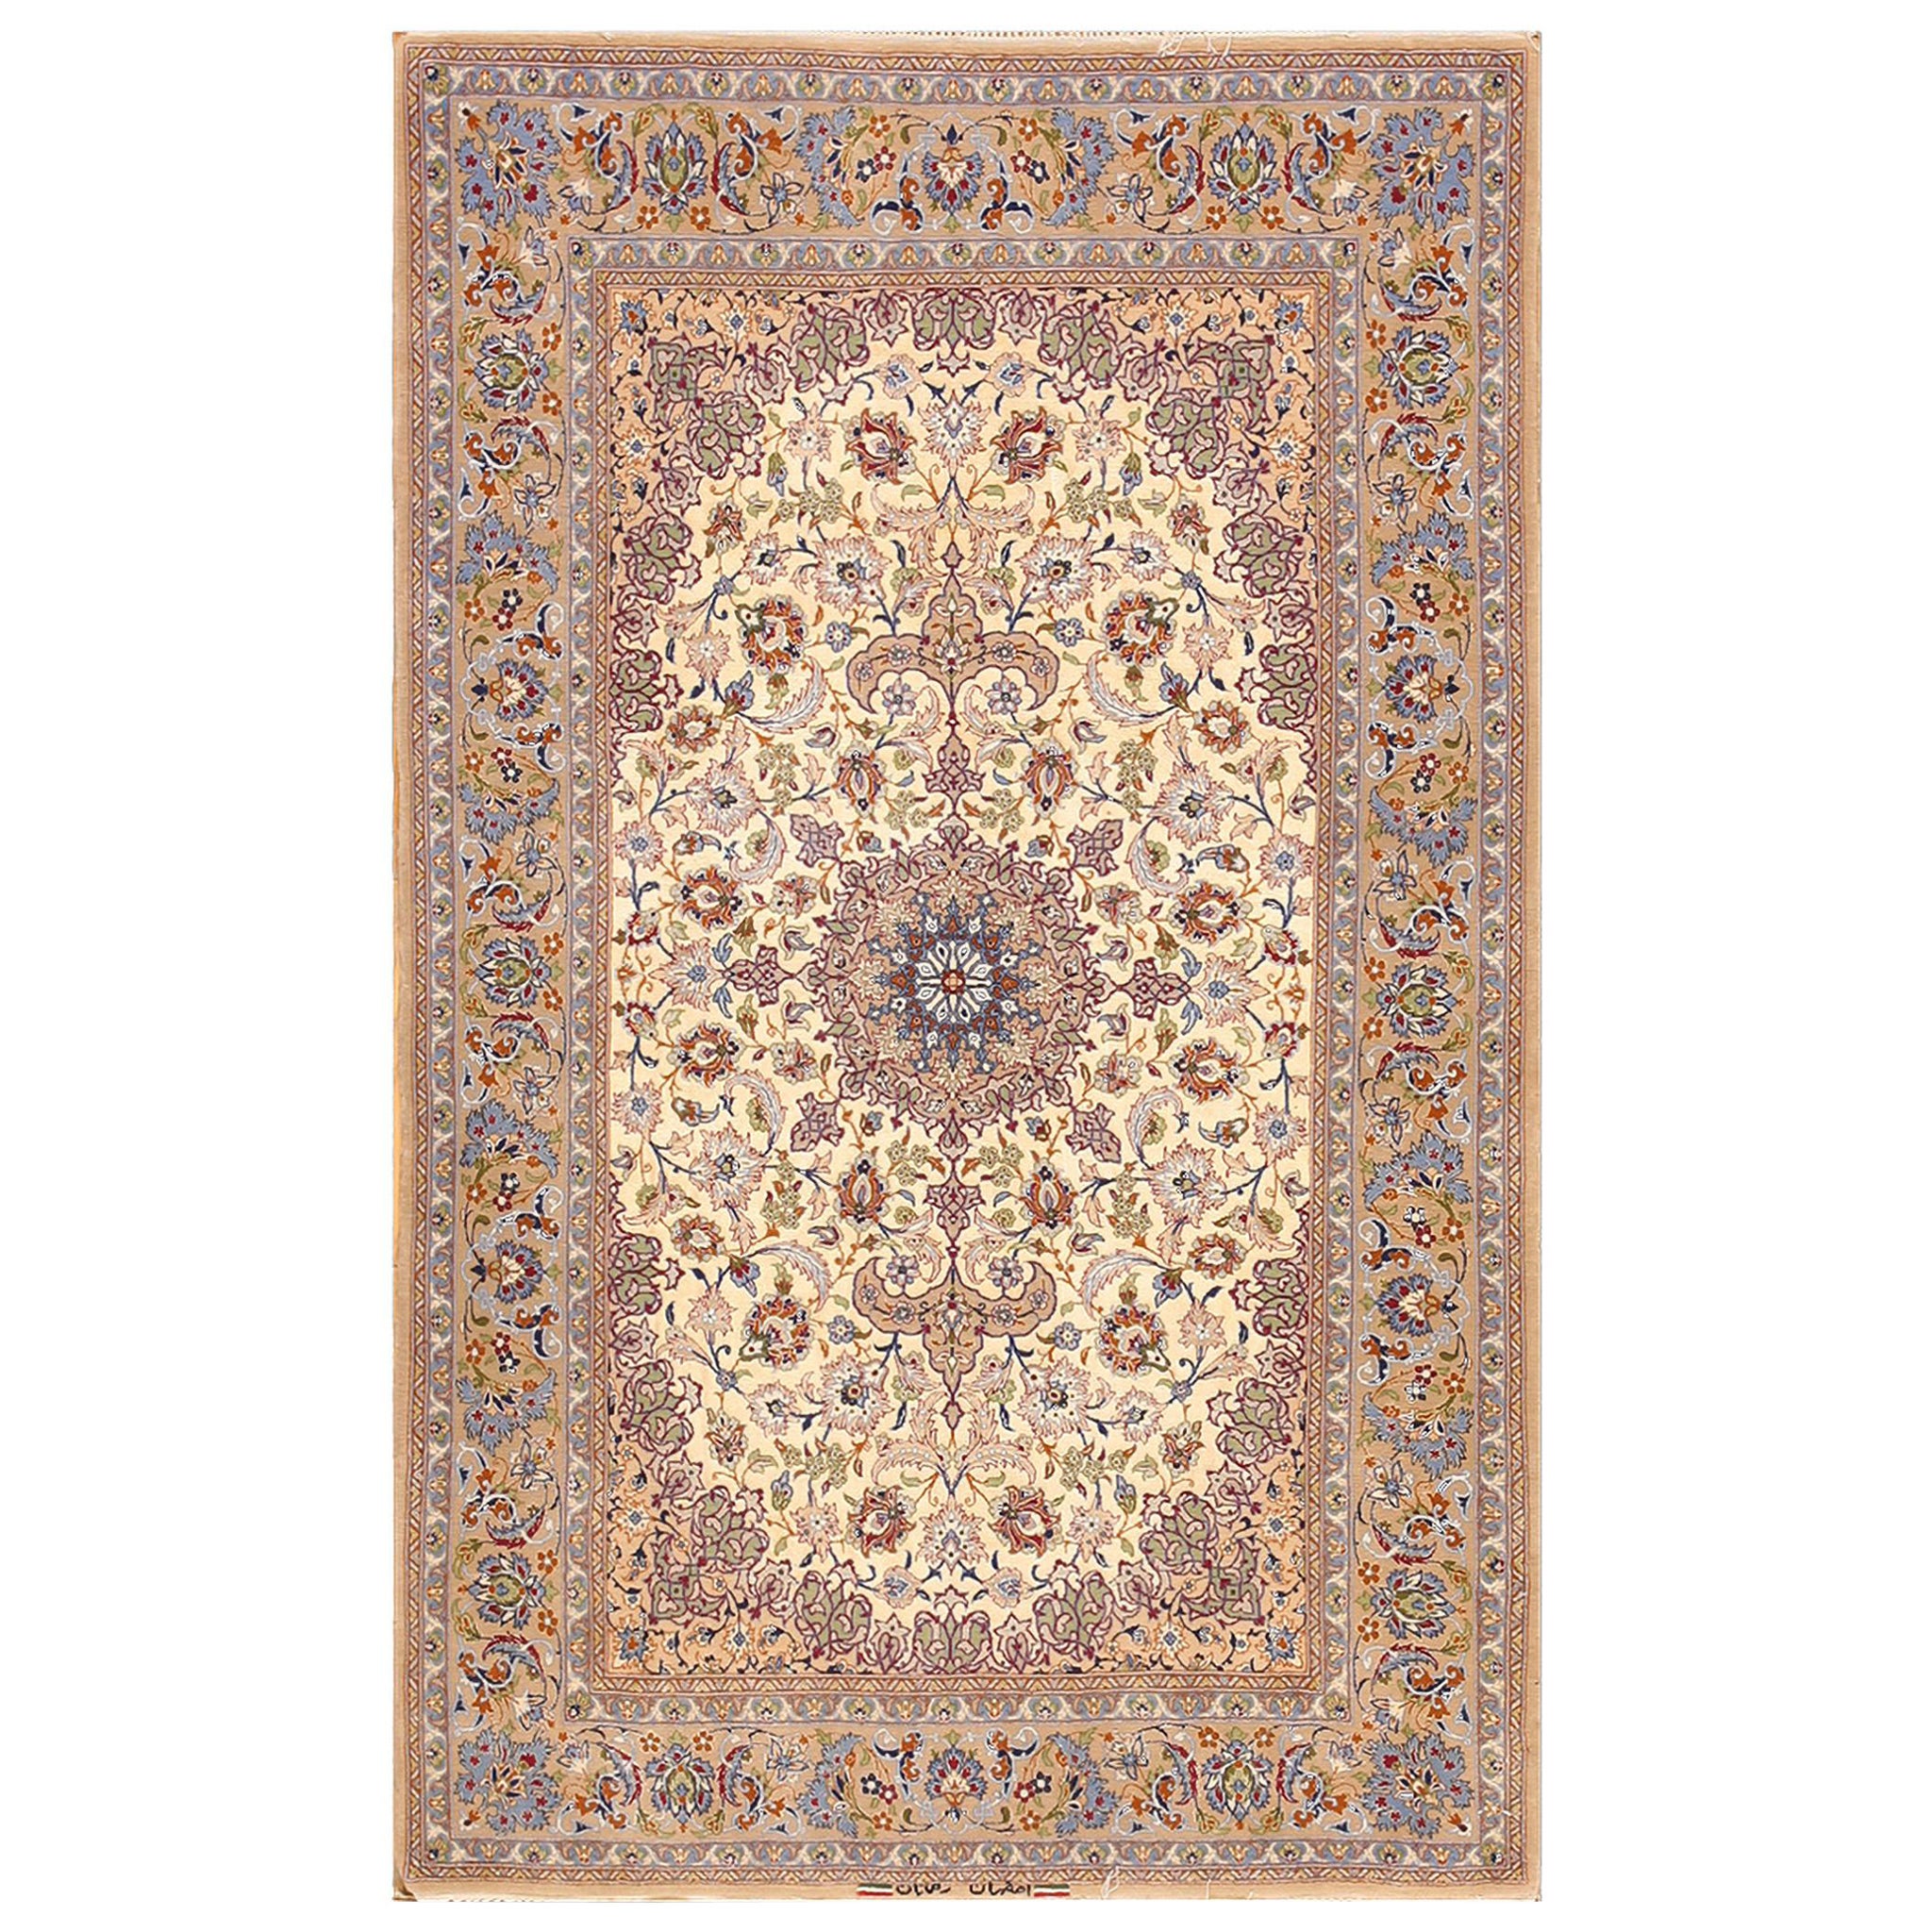 Mid 20th Century Persian Isfahan Carpet ( 3' 7" x 5' 7" - 109 x 170 cm ) For Sale